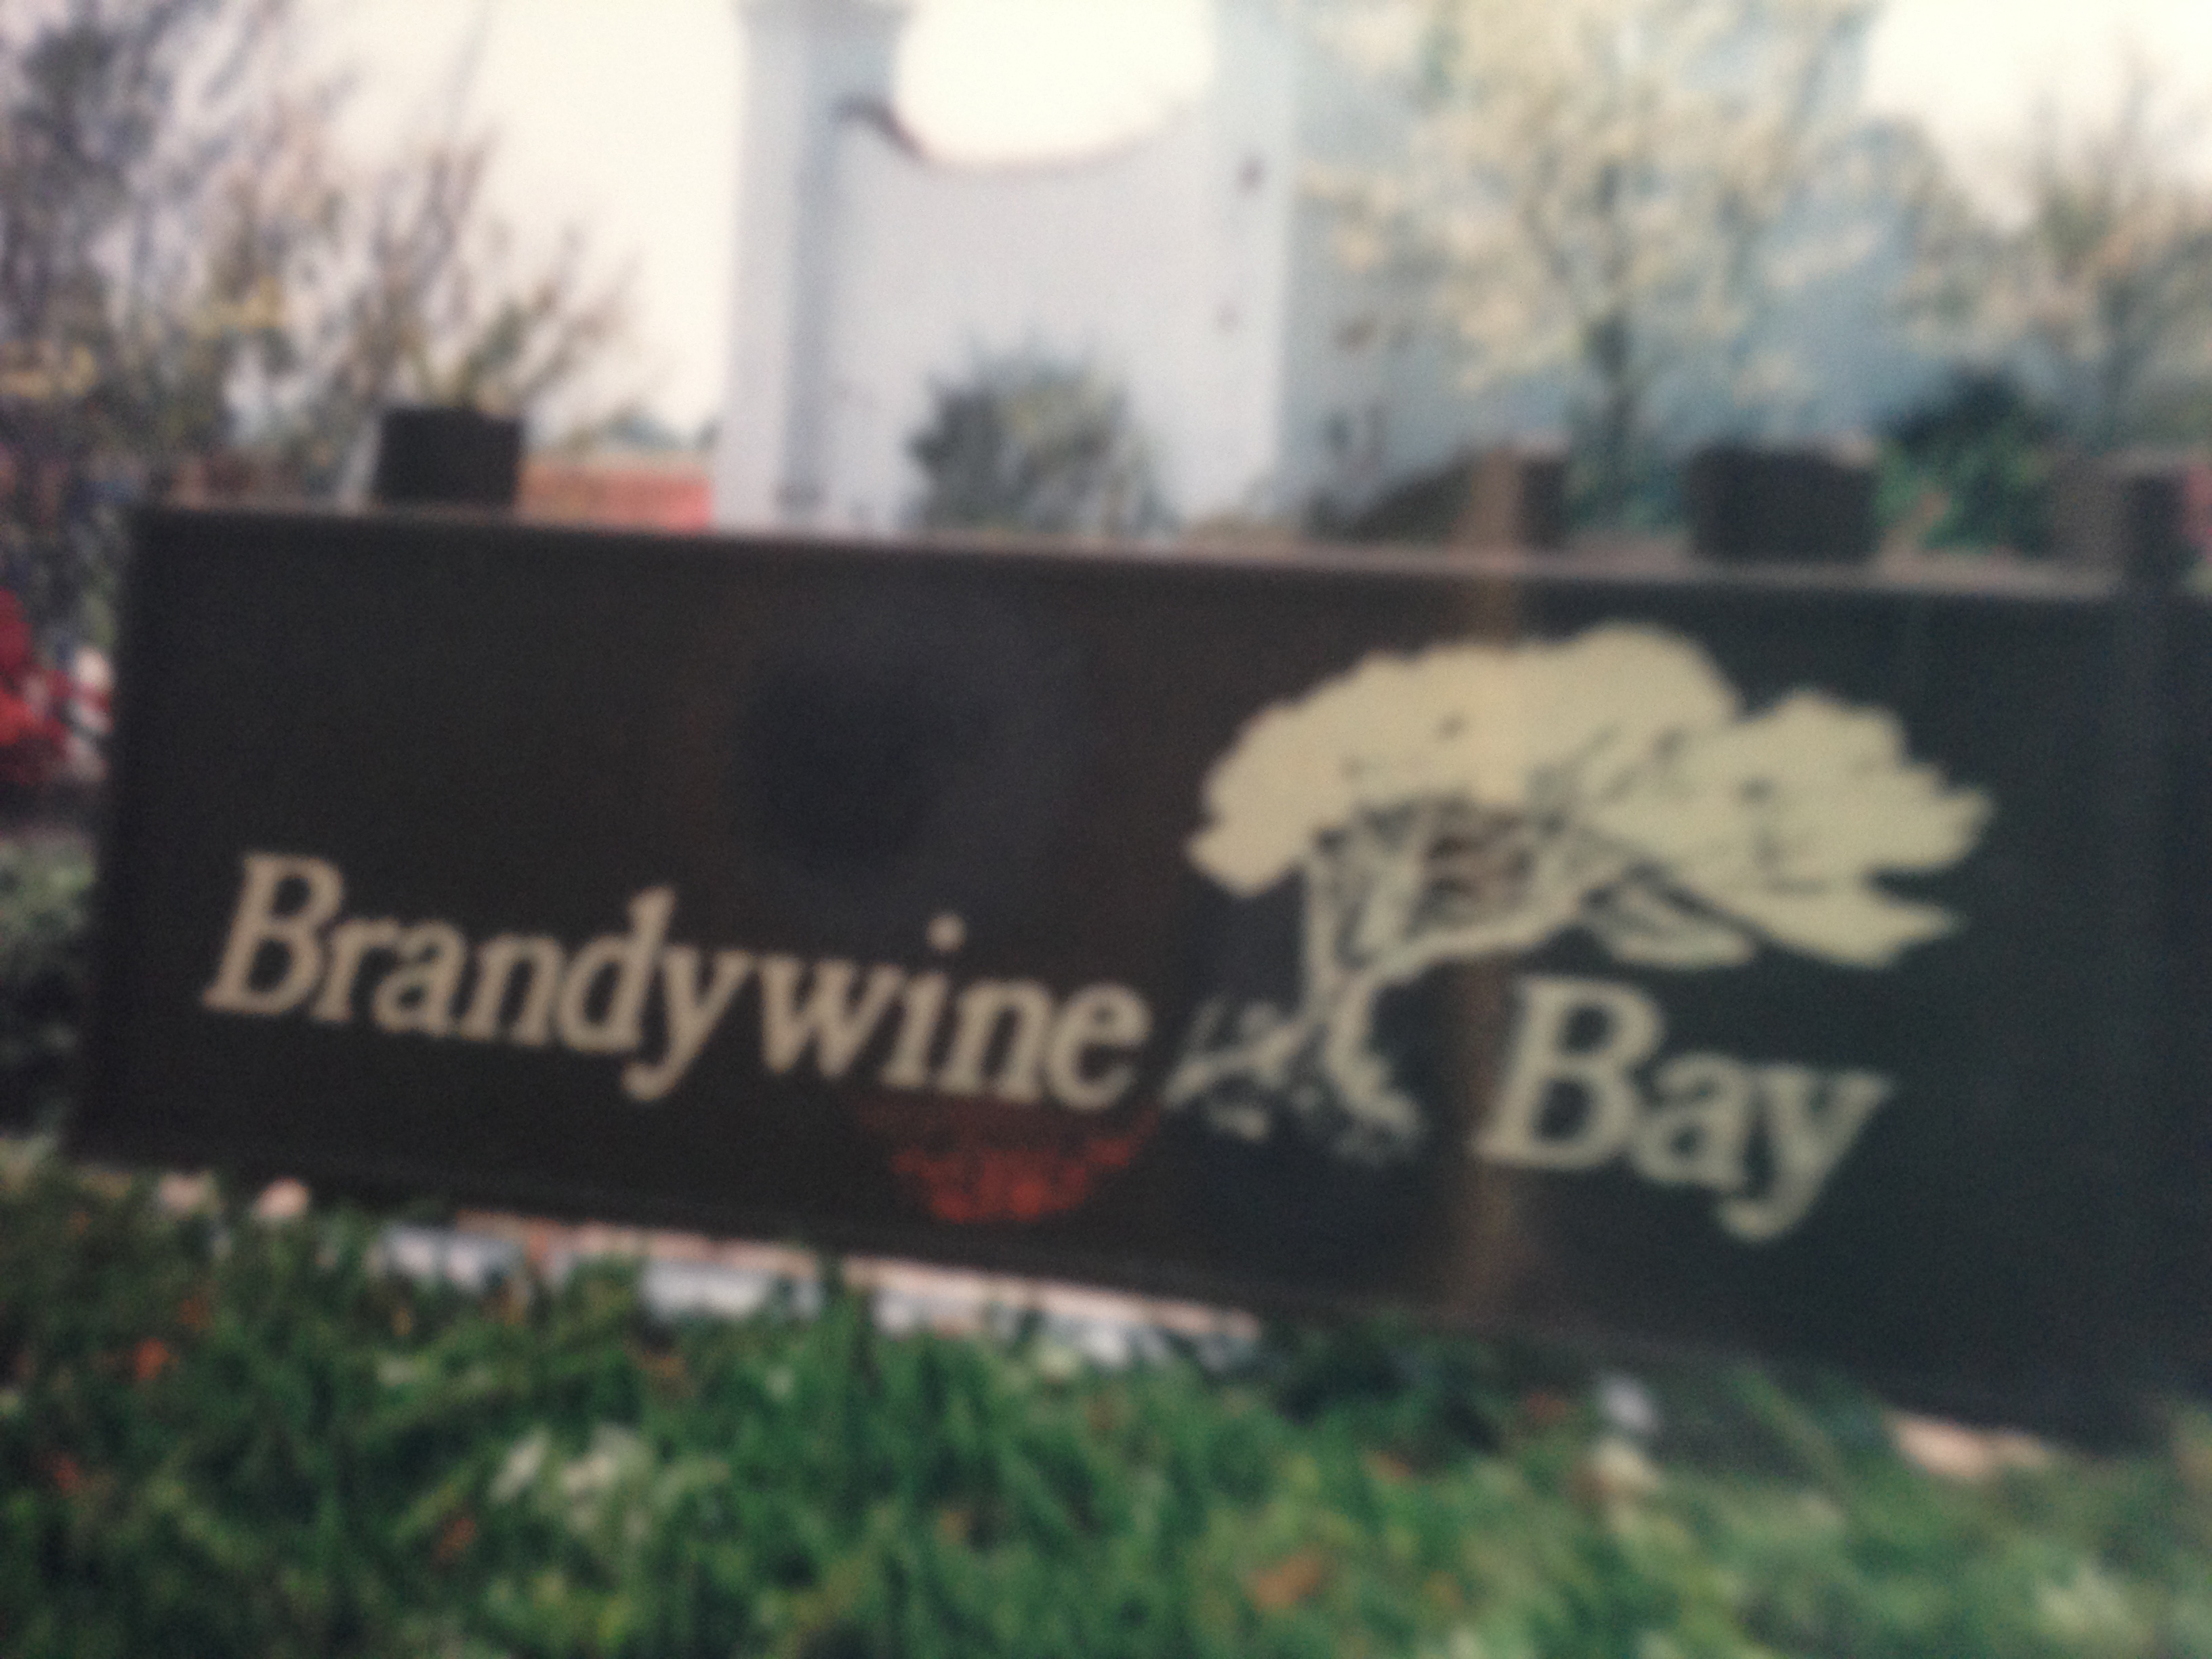 This is Brandywine Bay!